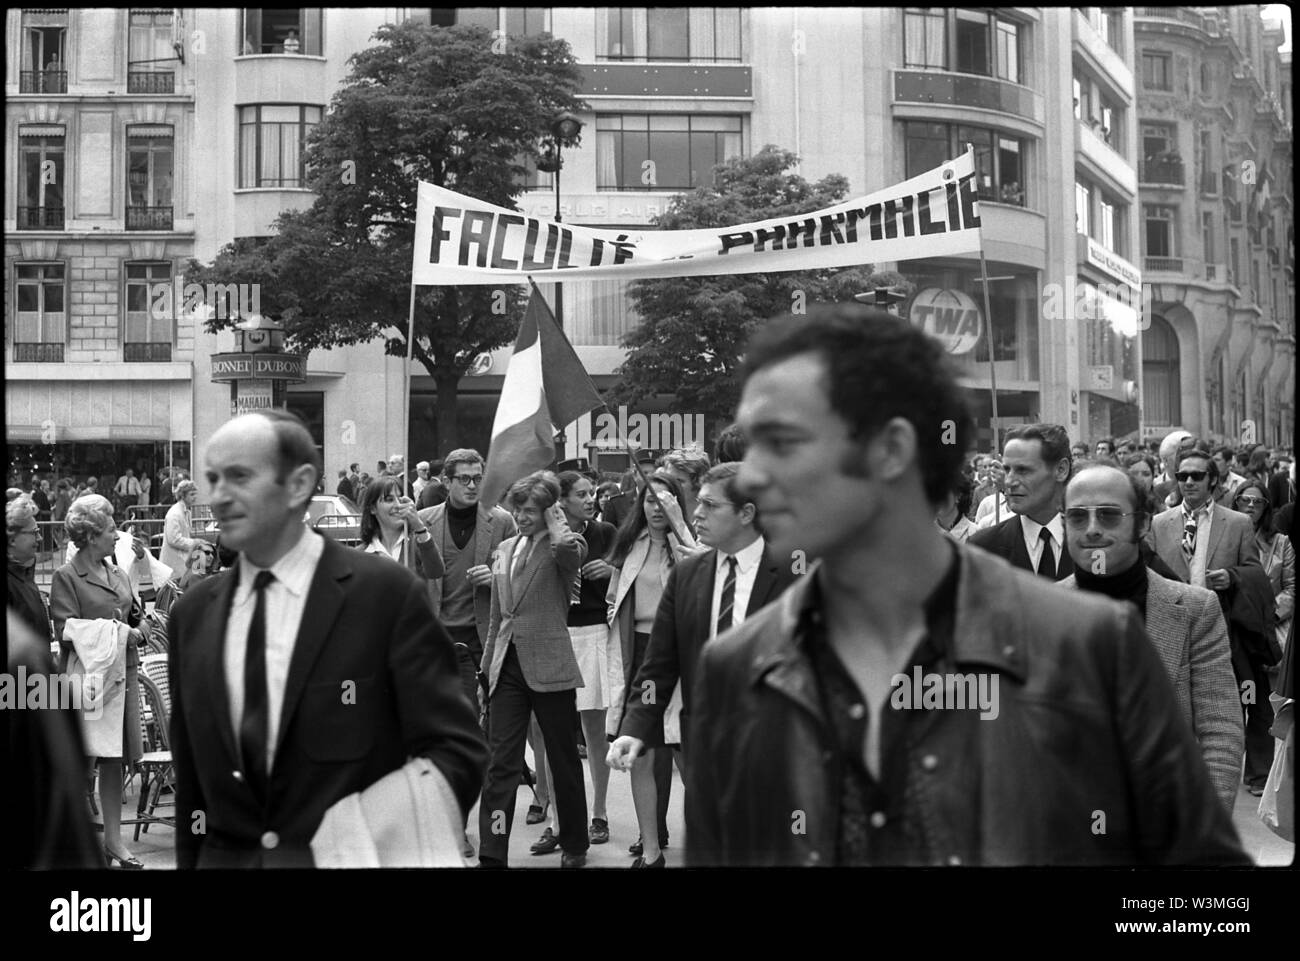 AJAXNETPHOTO. JULY, 1969. PARIS, FRANCE. - STUDENT STREET DEMO - PHARMACEUTICAL UNIVERSITY FACULTY STUDENTS PROTEST ON THE CITY STREETS AGAINST NEW REGULATIONS BARRING THEM FROM HOSPITAL PRACTICE.PHOTO:JONATHAN EASTLAND/AJAX REF:692206035 Stock Photo